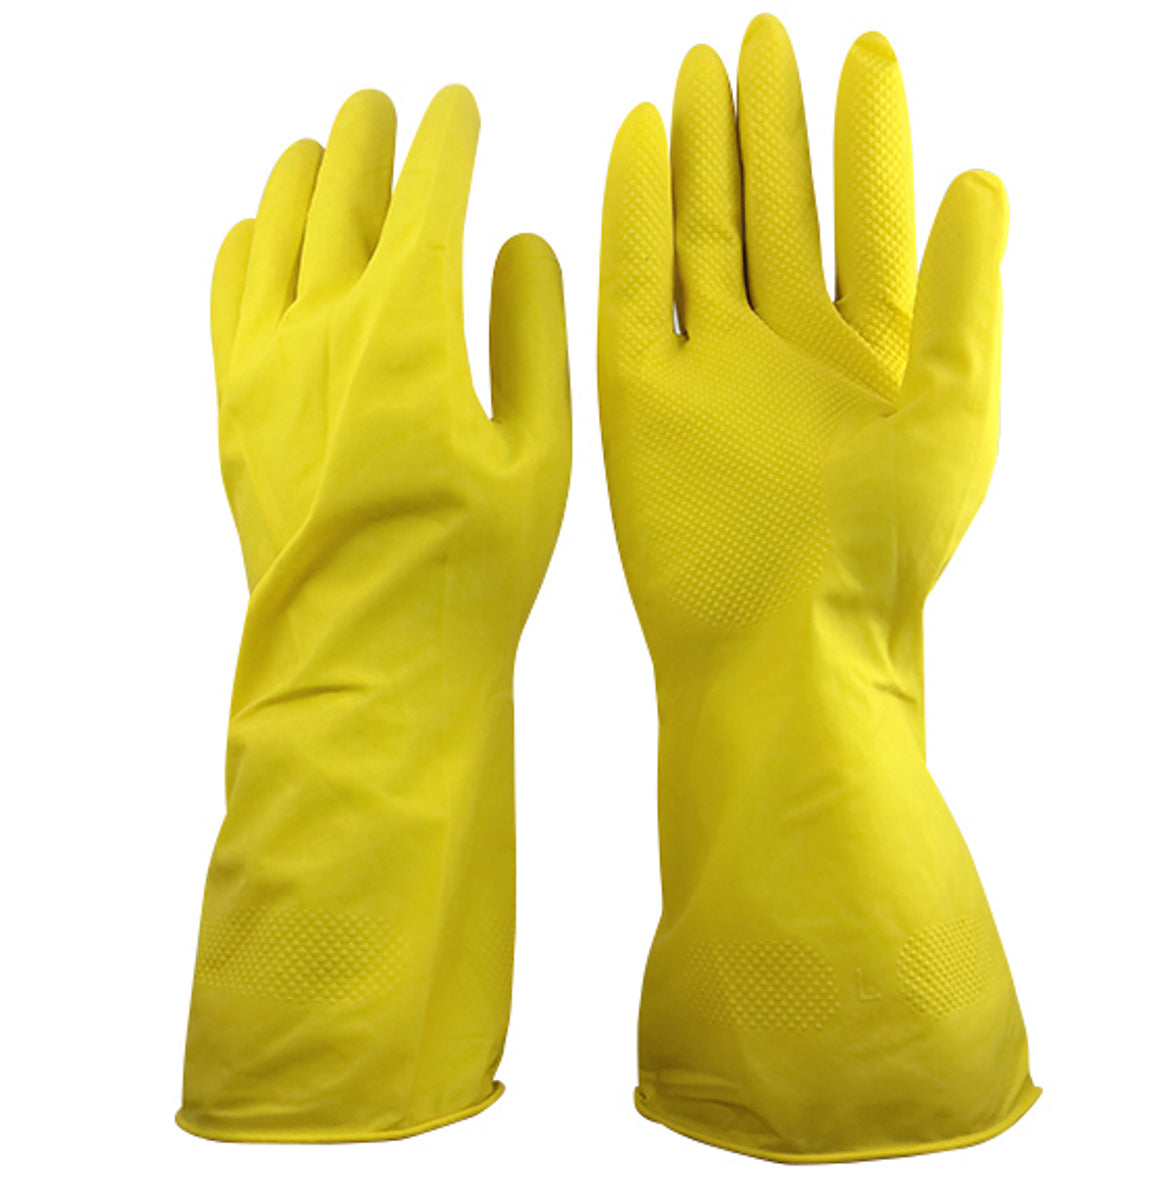 Reusable Household Gloves, Rubber Dishwashing Gloves, Painting, Gardening, Pet Caring and more